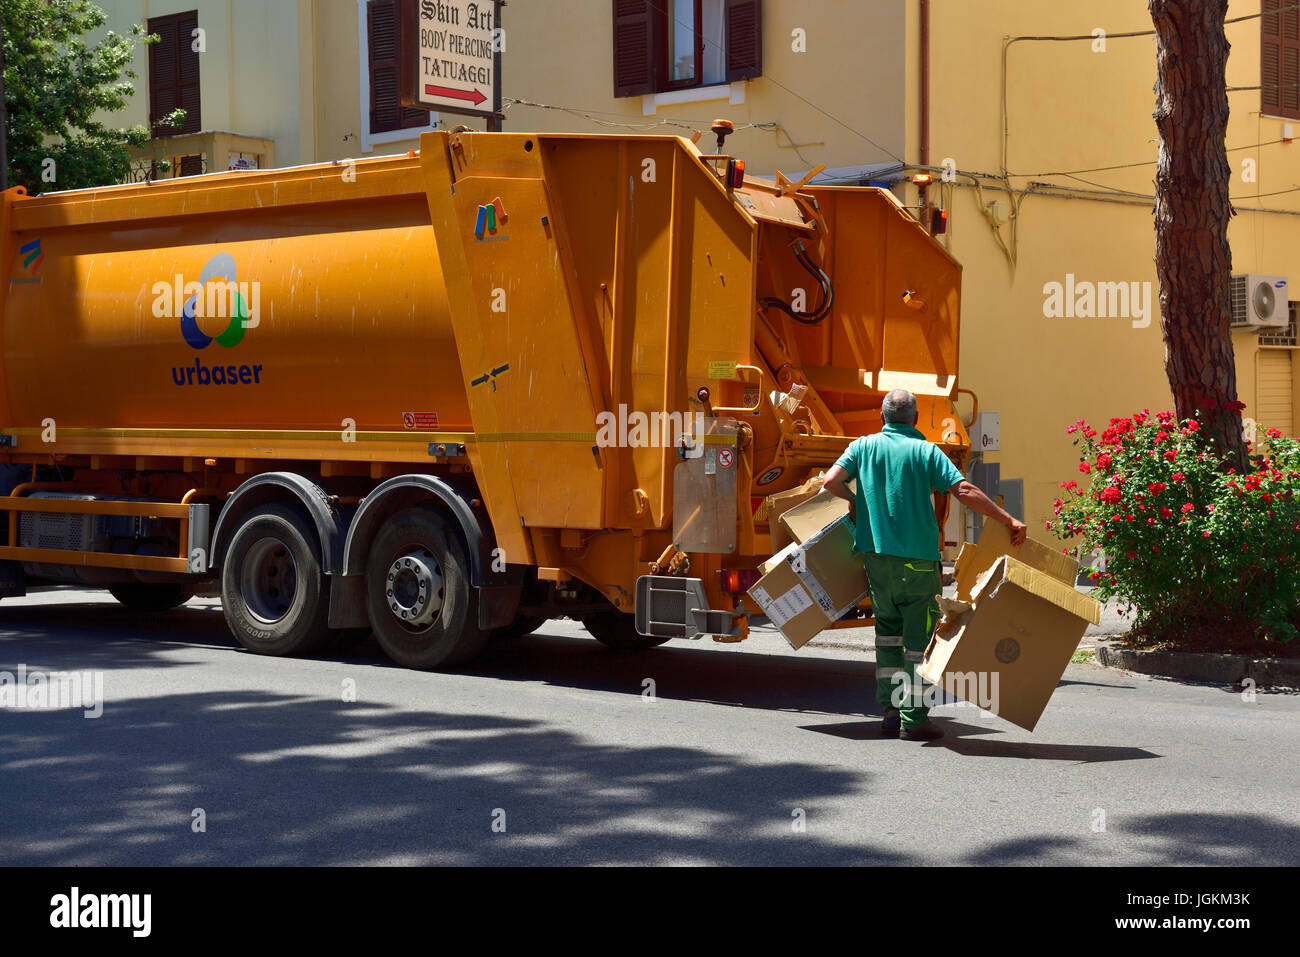 Recycling lorry with workman taking cardboard to it Stock Photo